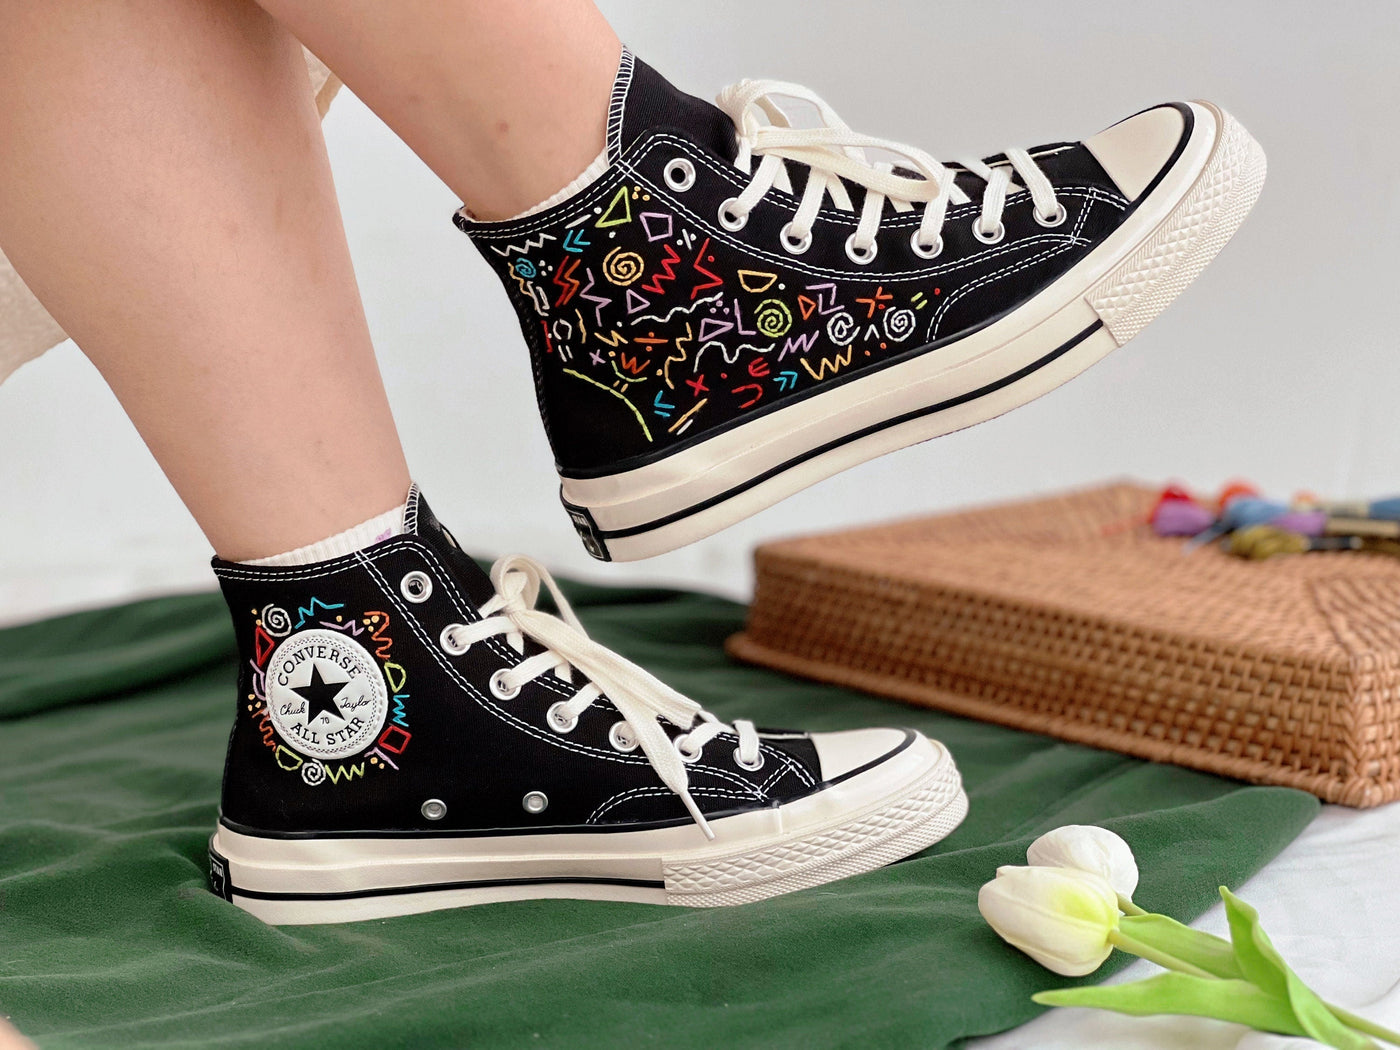 Embroidered Convers,Converse Hi Tops, Math Formula Embroidery Pattern